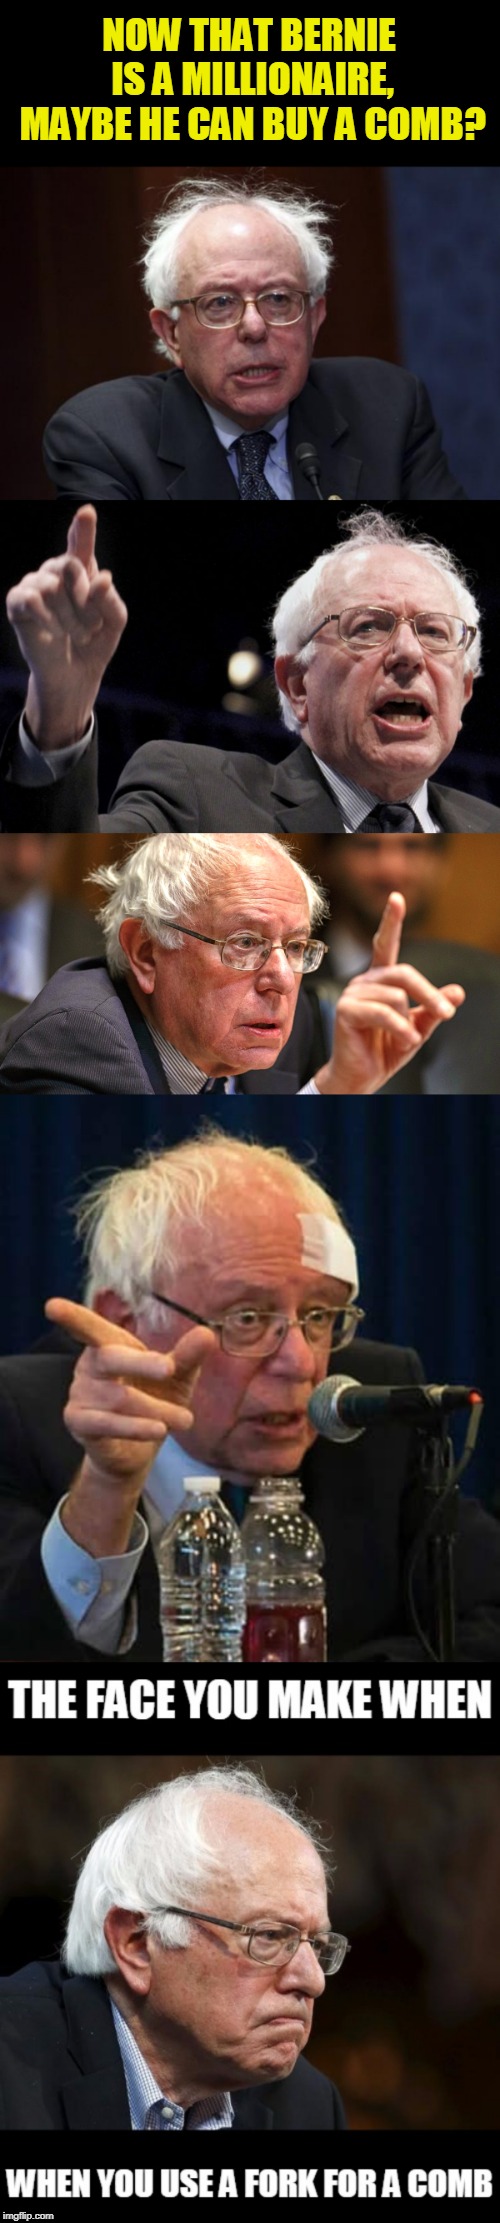 even worse than Trumps doo. | NOW THAT BERNIE IS A MILLIONAIRE, MAYBE HE CAN BUY A COMB? | image tagged in bad hair day,bad hair life,bernie sanders,politics | made w/ Imgflip meme maker